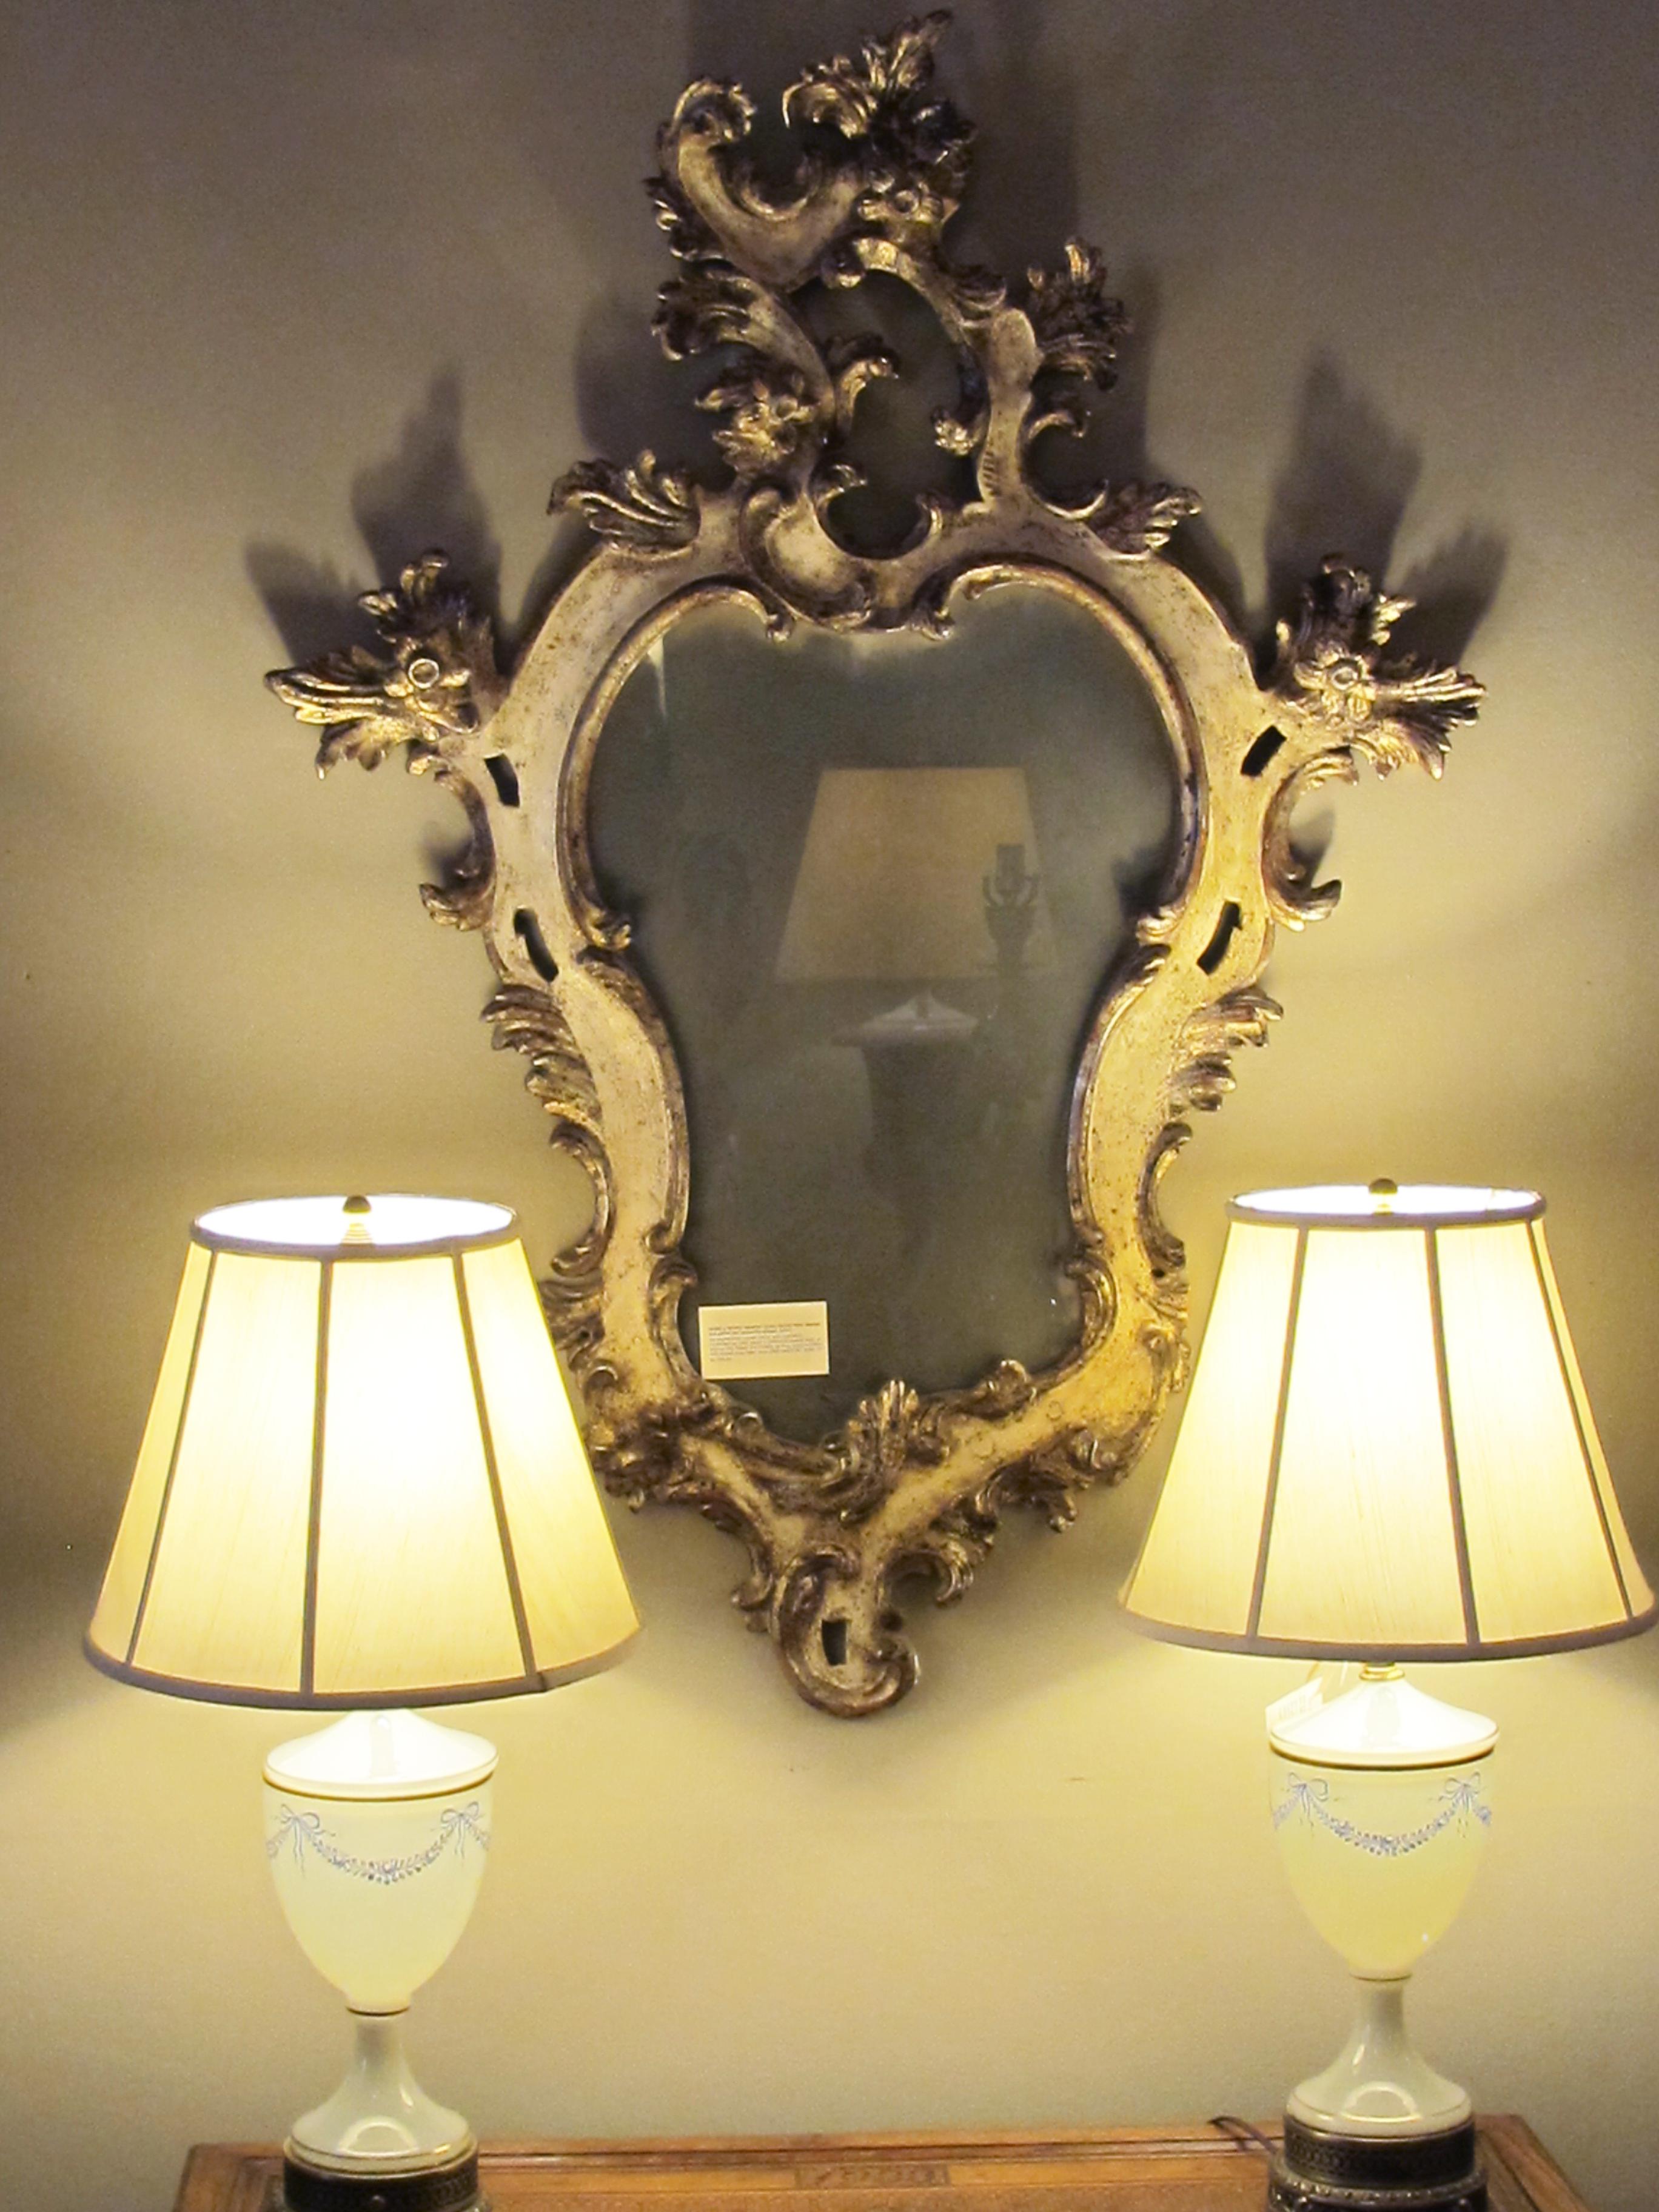 Carved Venetian Rococo Revival Ivory Painted and Parcel-Gilt Cartouche-Shaped Mirror For Sale